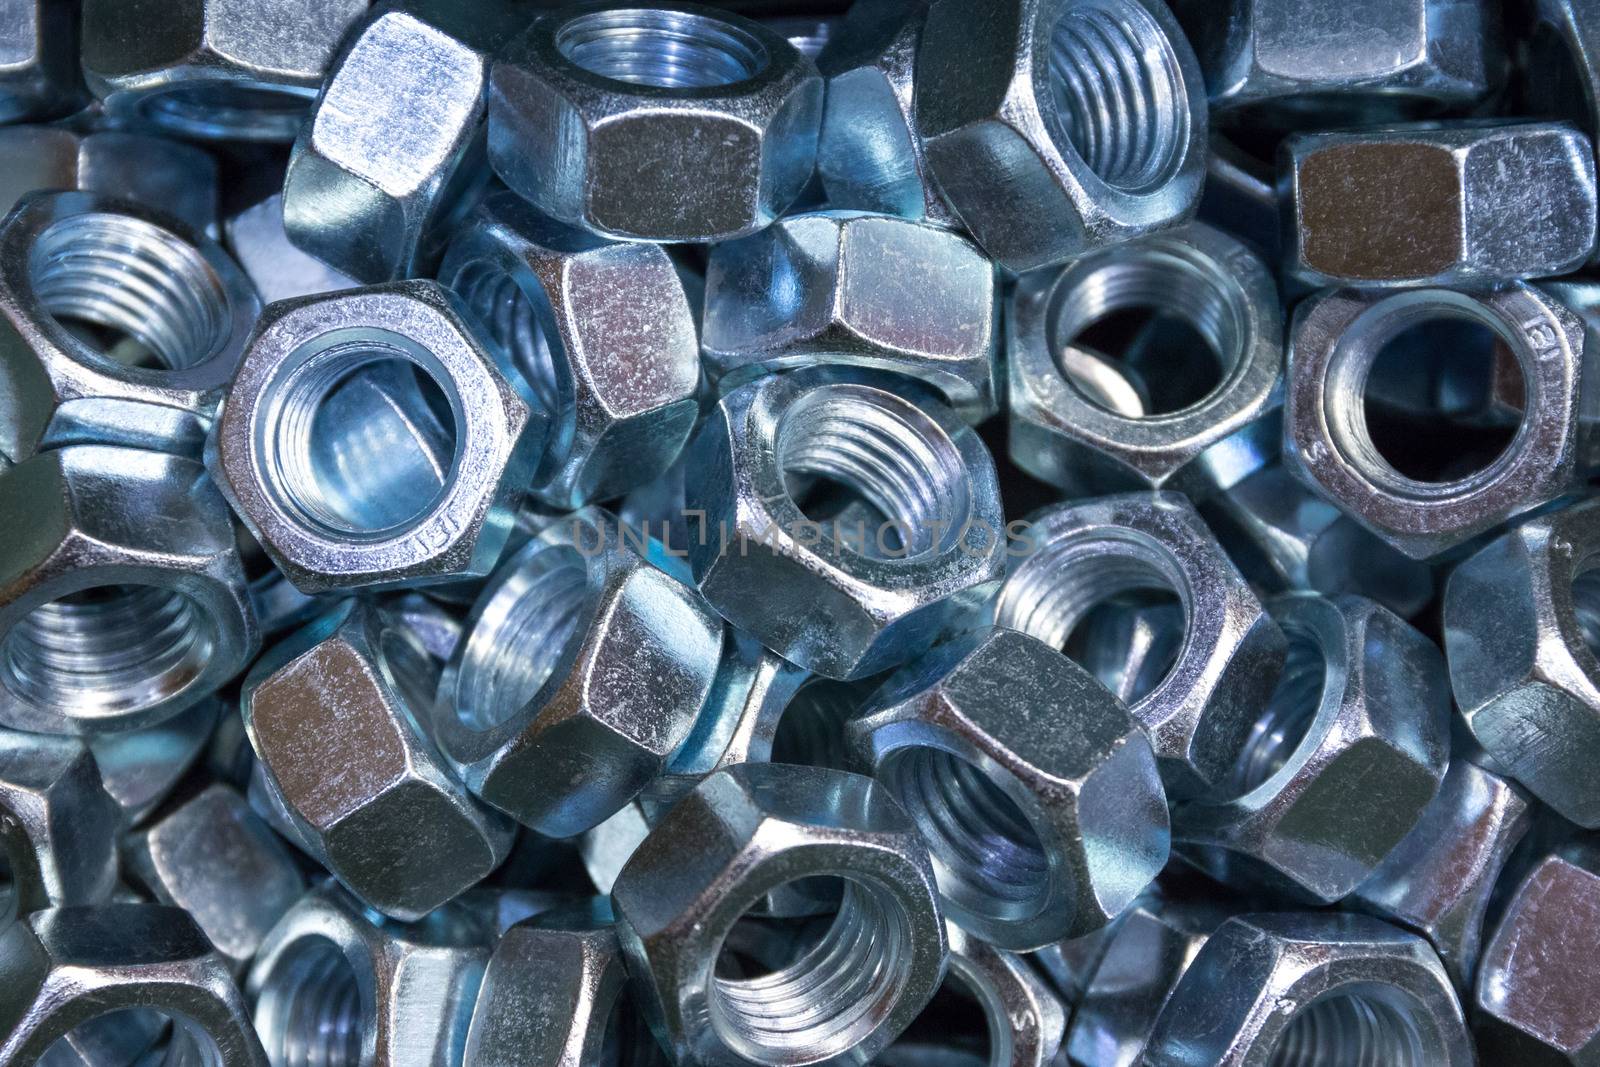 A pile of galvanized industrial nuts.